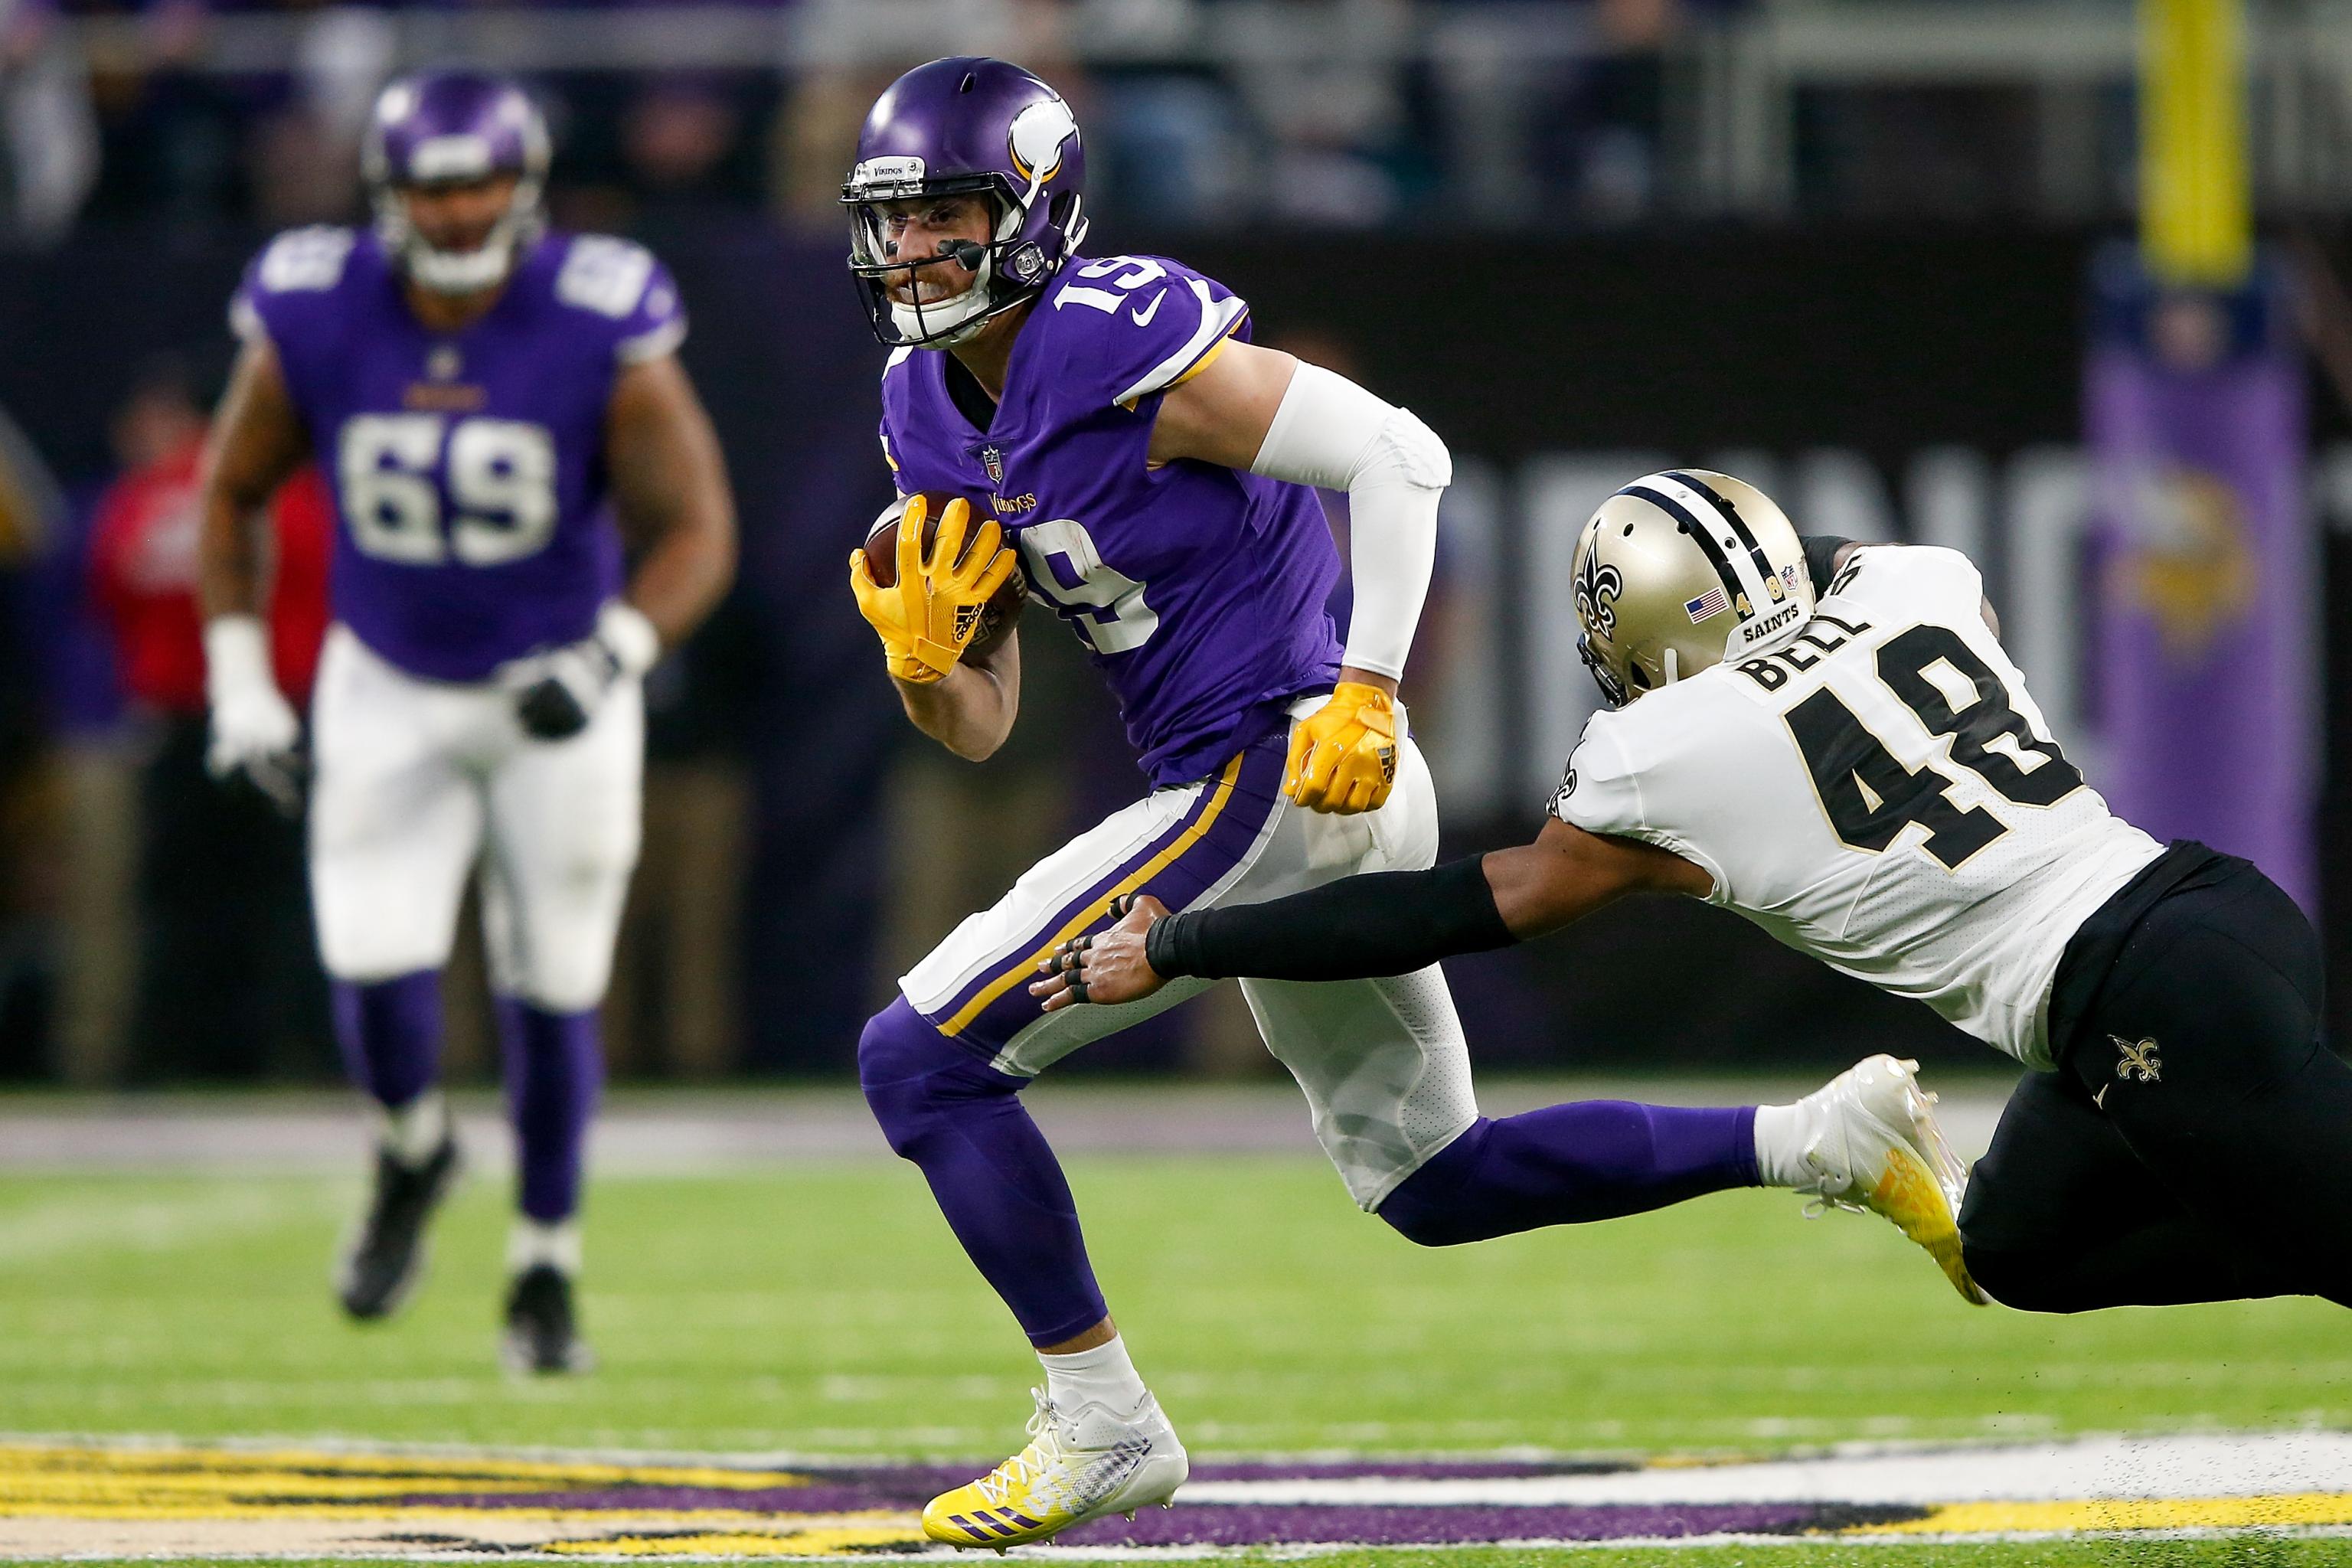 Vikings vs. Eagles 2018 live results: Score updates and highlights 